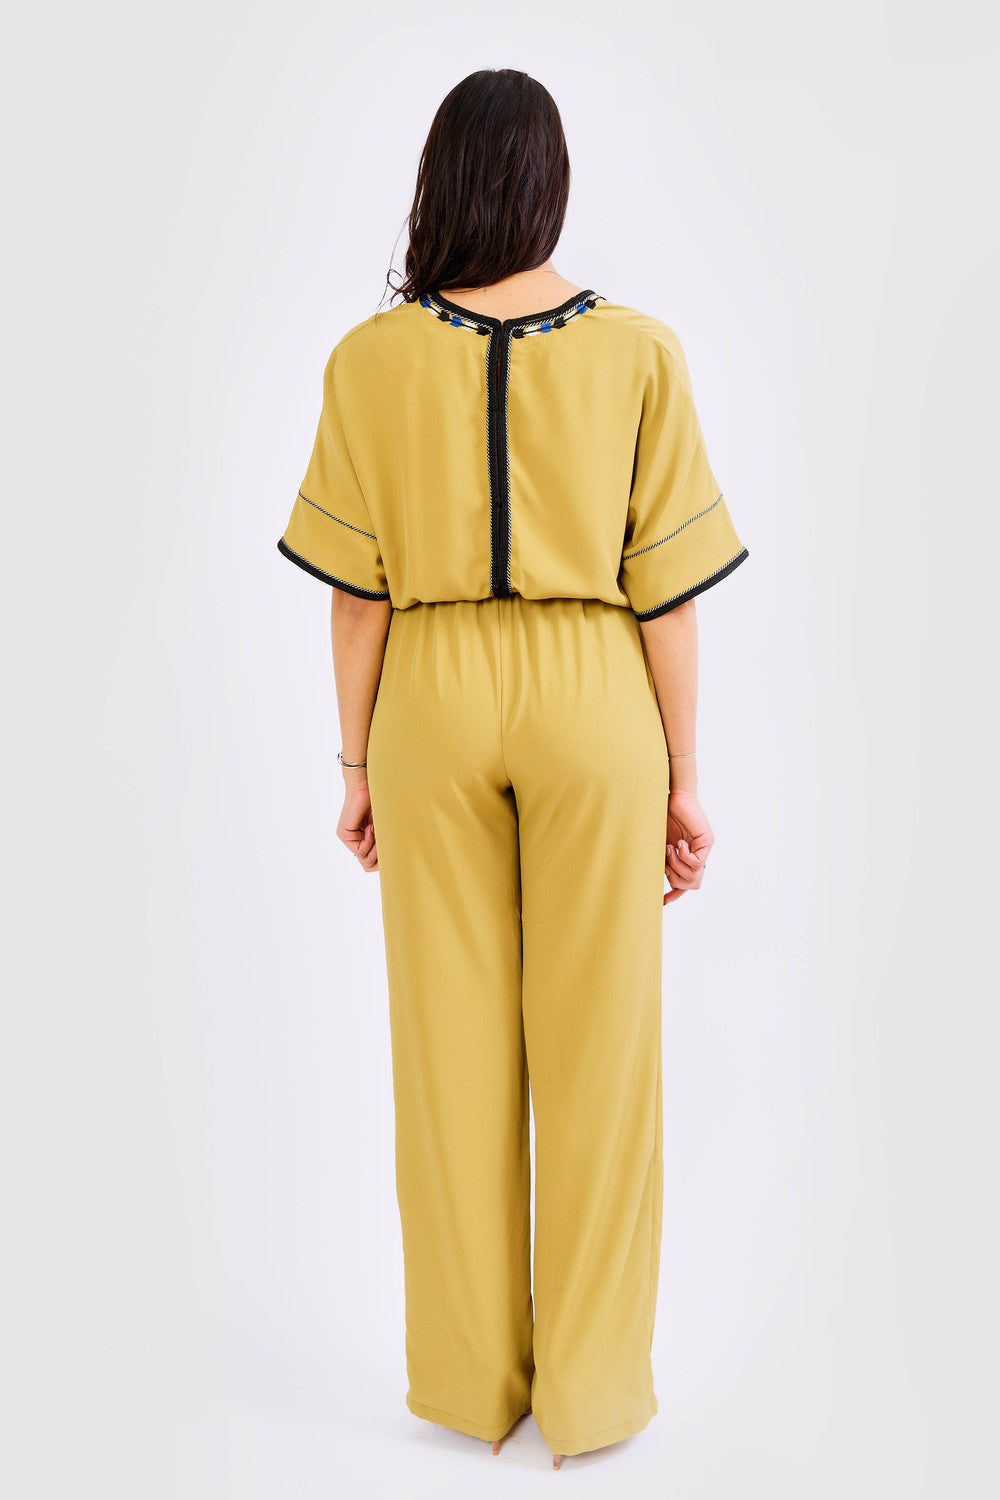 Amira Cropped Sleeve Embroidered Full-Length Jumpsuit in Lime